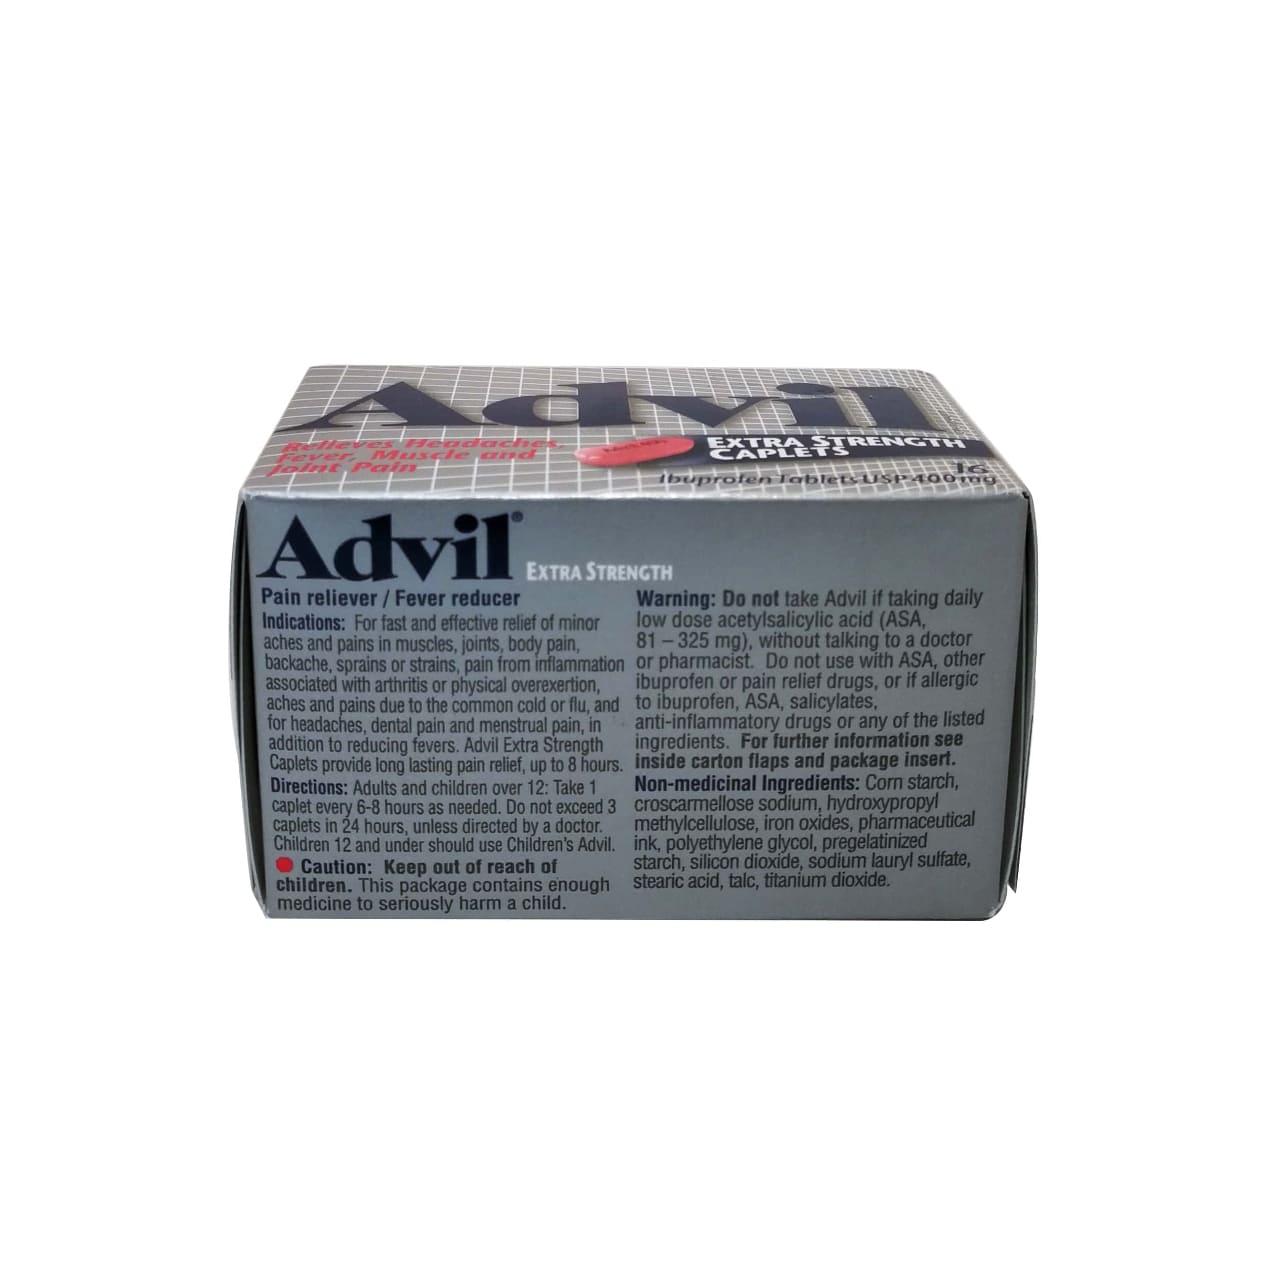 English product details, directions, ingredients, and warnings for Advil Extra Strength Ibuprofen 400mg Caplets